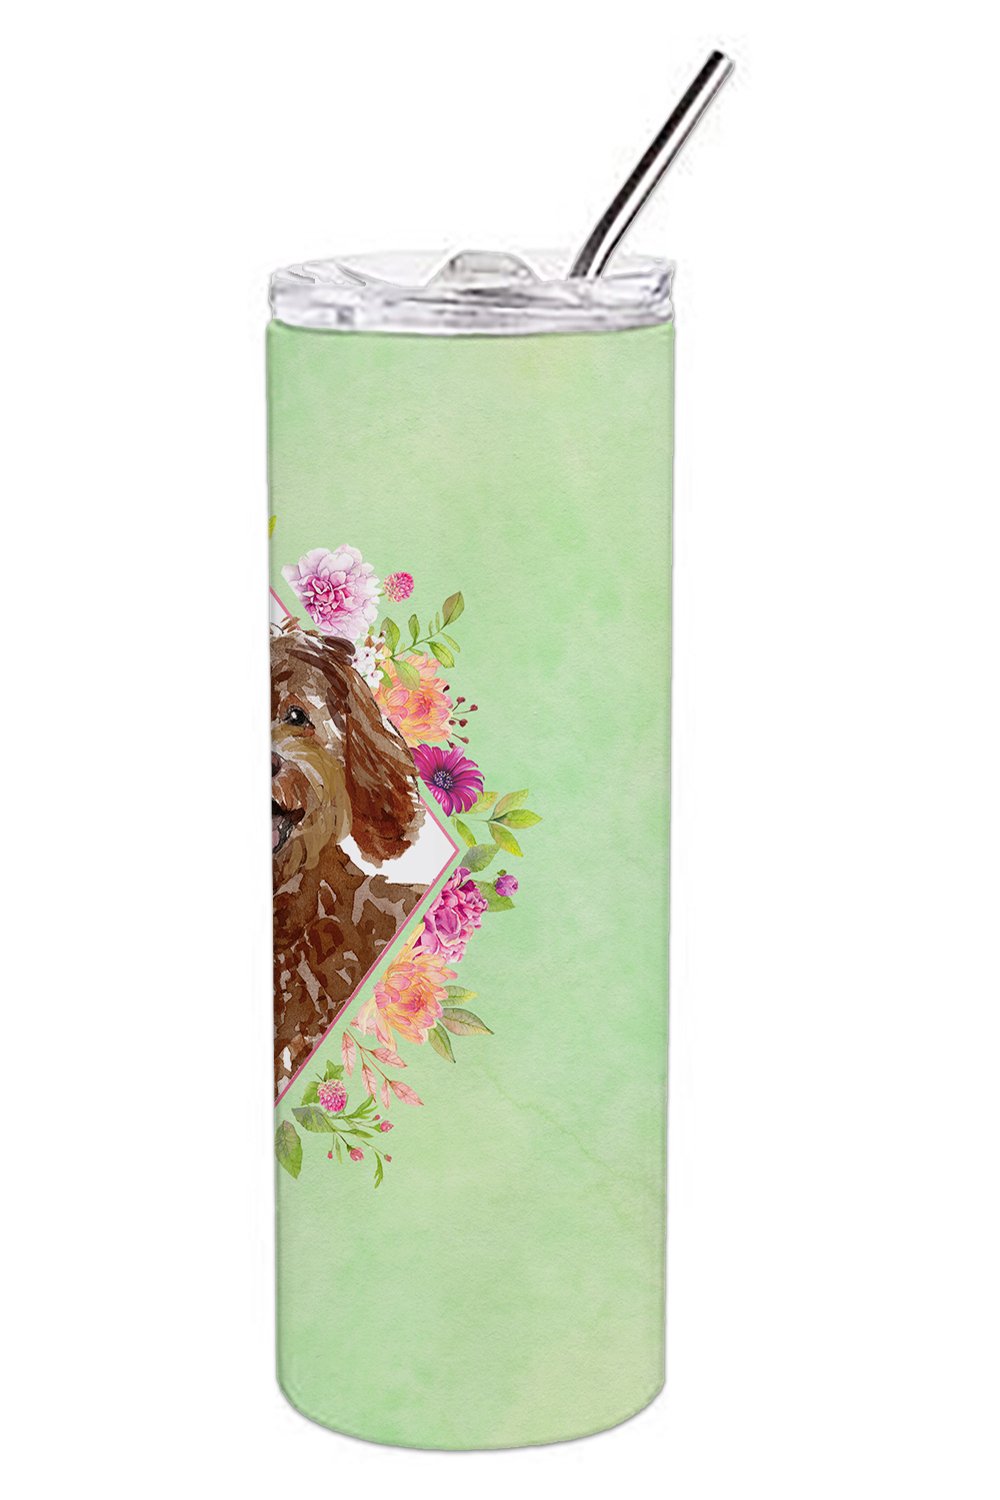 Labradoodle Green Flowers Double Walled Stainless Steel 20 oz Skinny Tumbler CK4388TBL20 by Caroline's Treasures